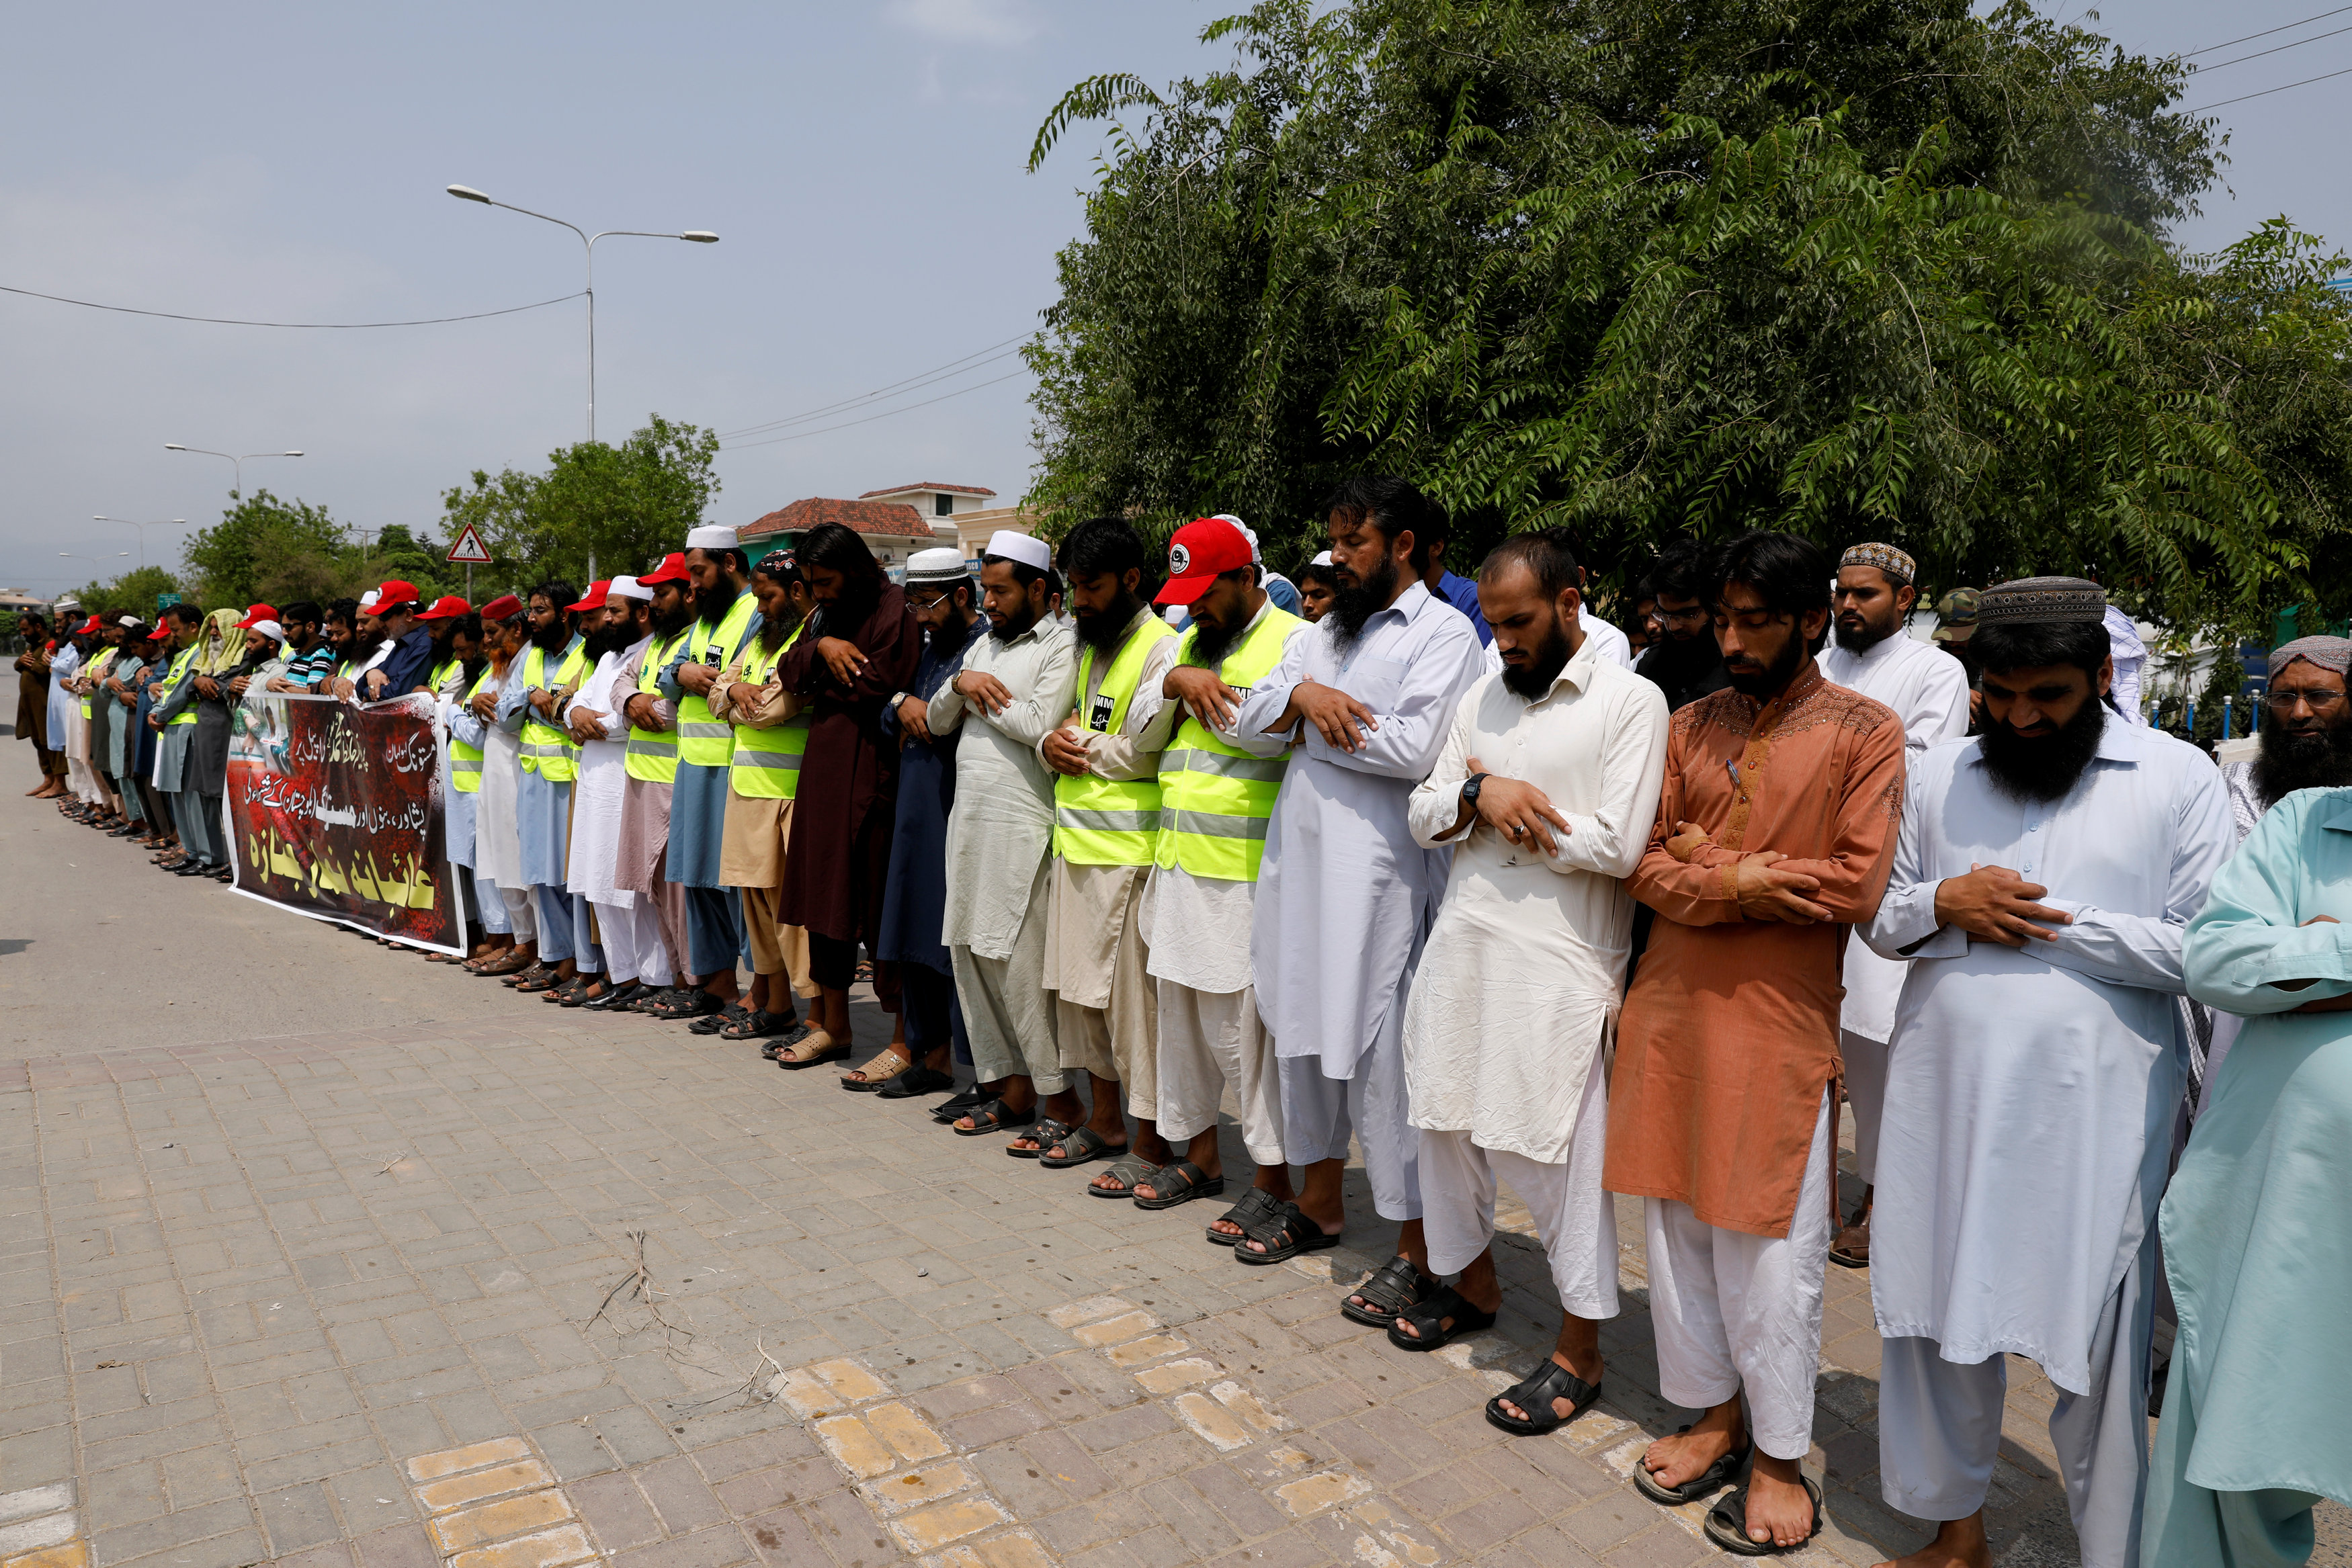 Supporters of the Jamaat-ud-Dawa Islamic organization offer funeral prayers in absentia for the victims of Friday's suicide attack at an election rally in Mastung, outside a mosque in Islamabad